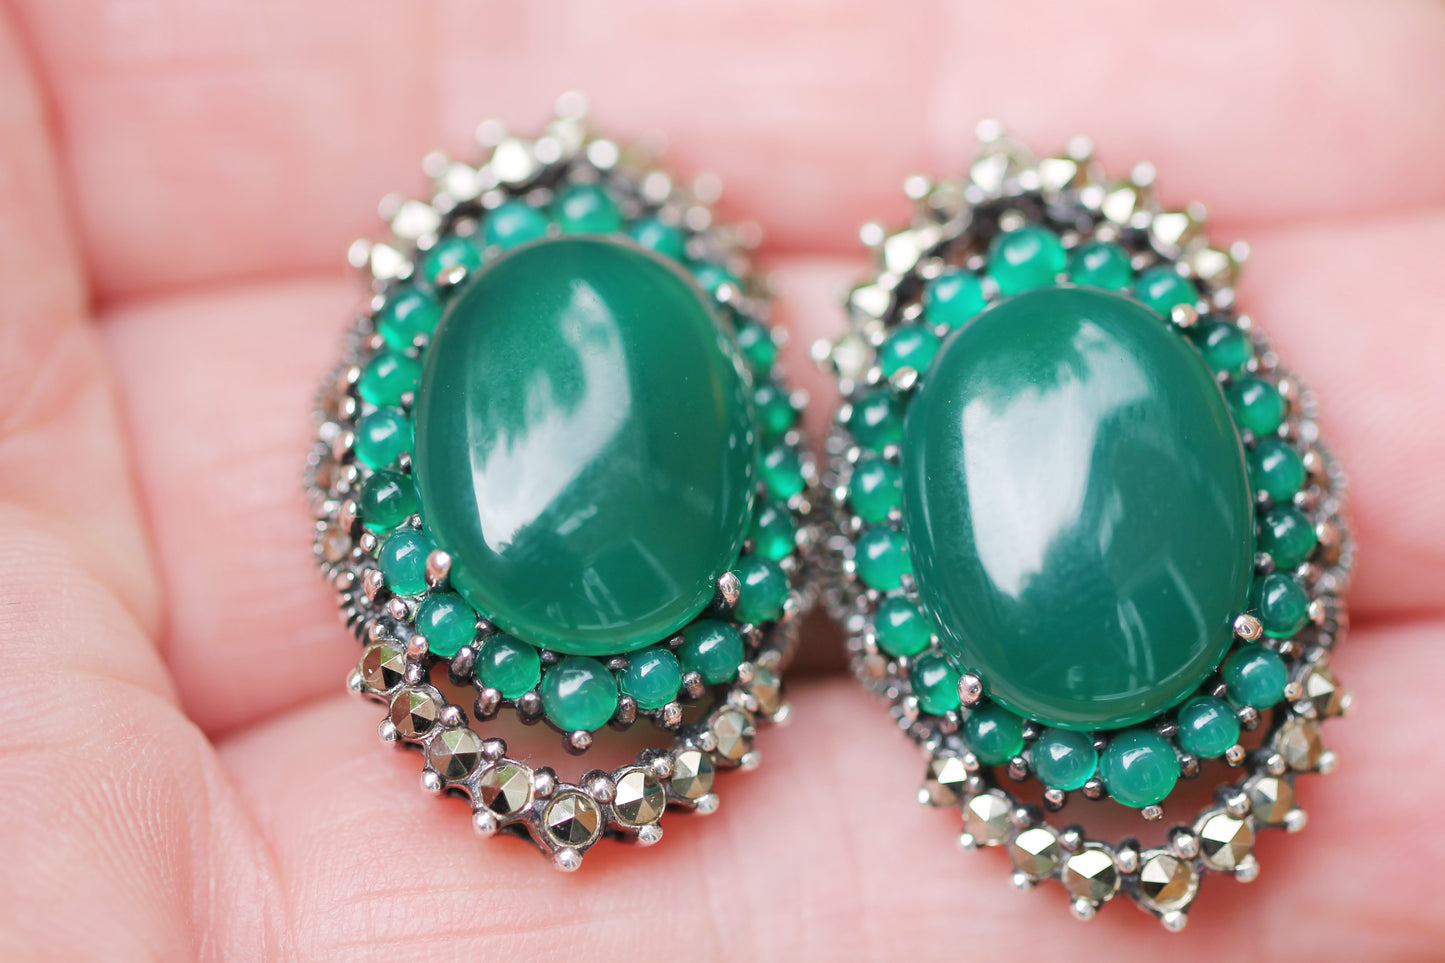 Stunning 925 Silver Marcasite and Cabochon Green Agate / Gemstones Art Deco Style Earrings